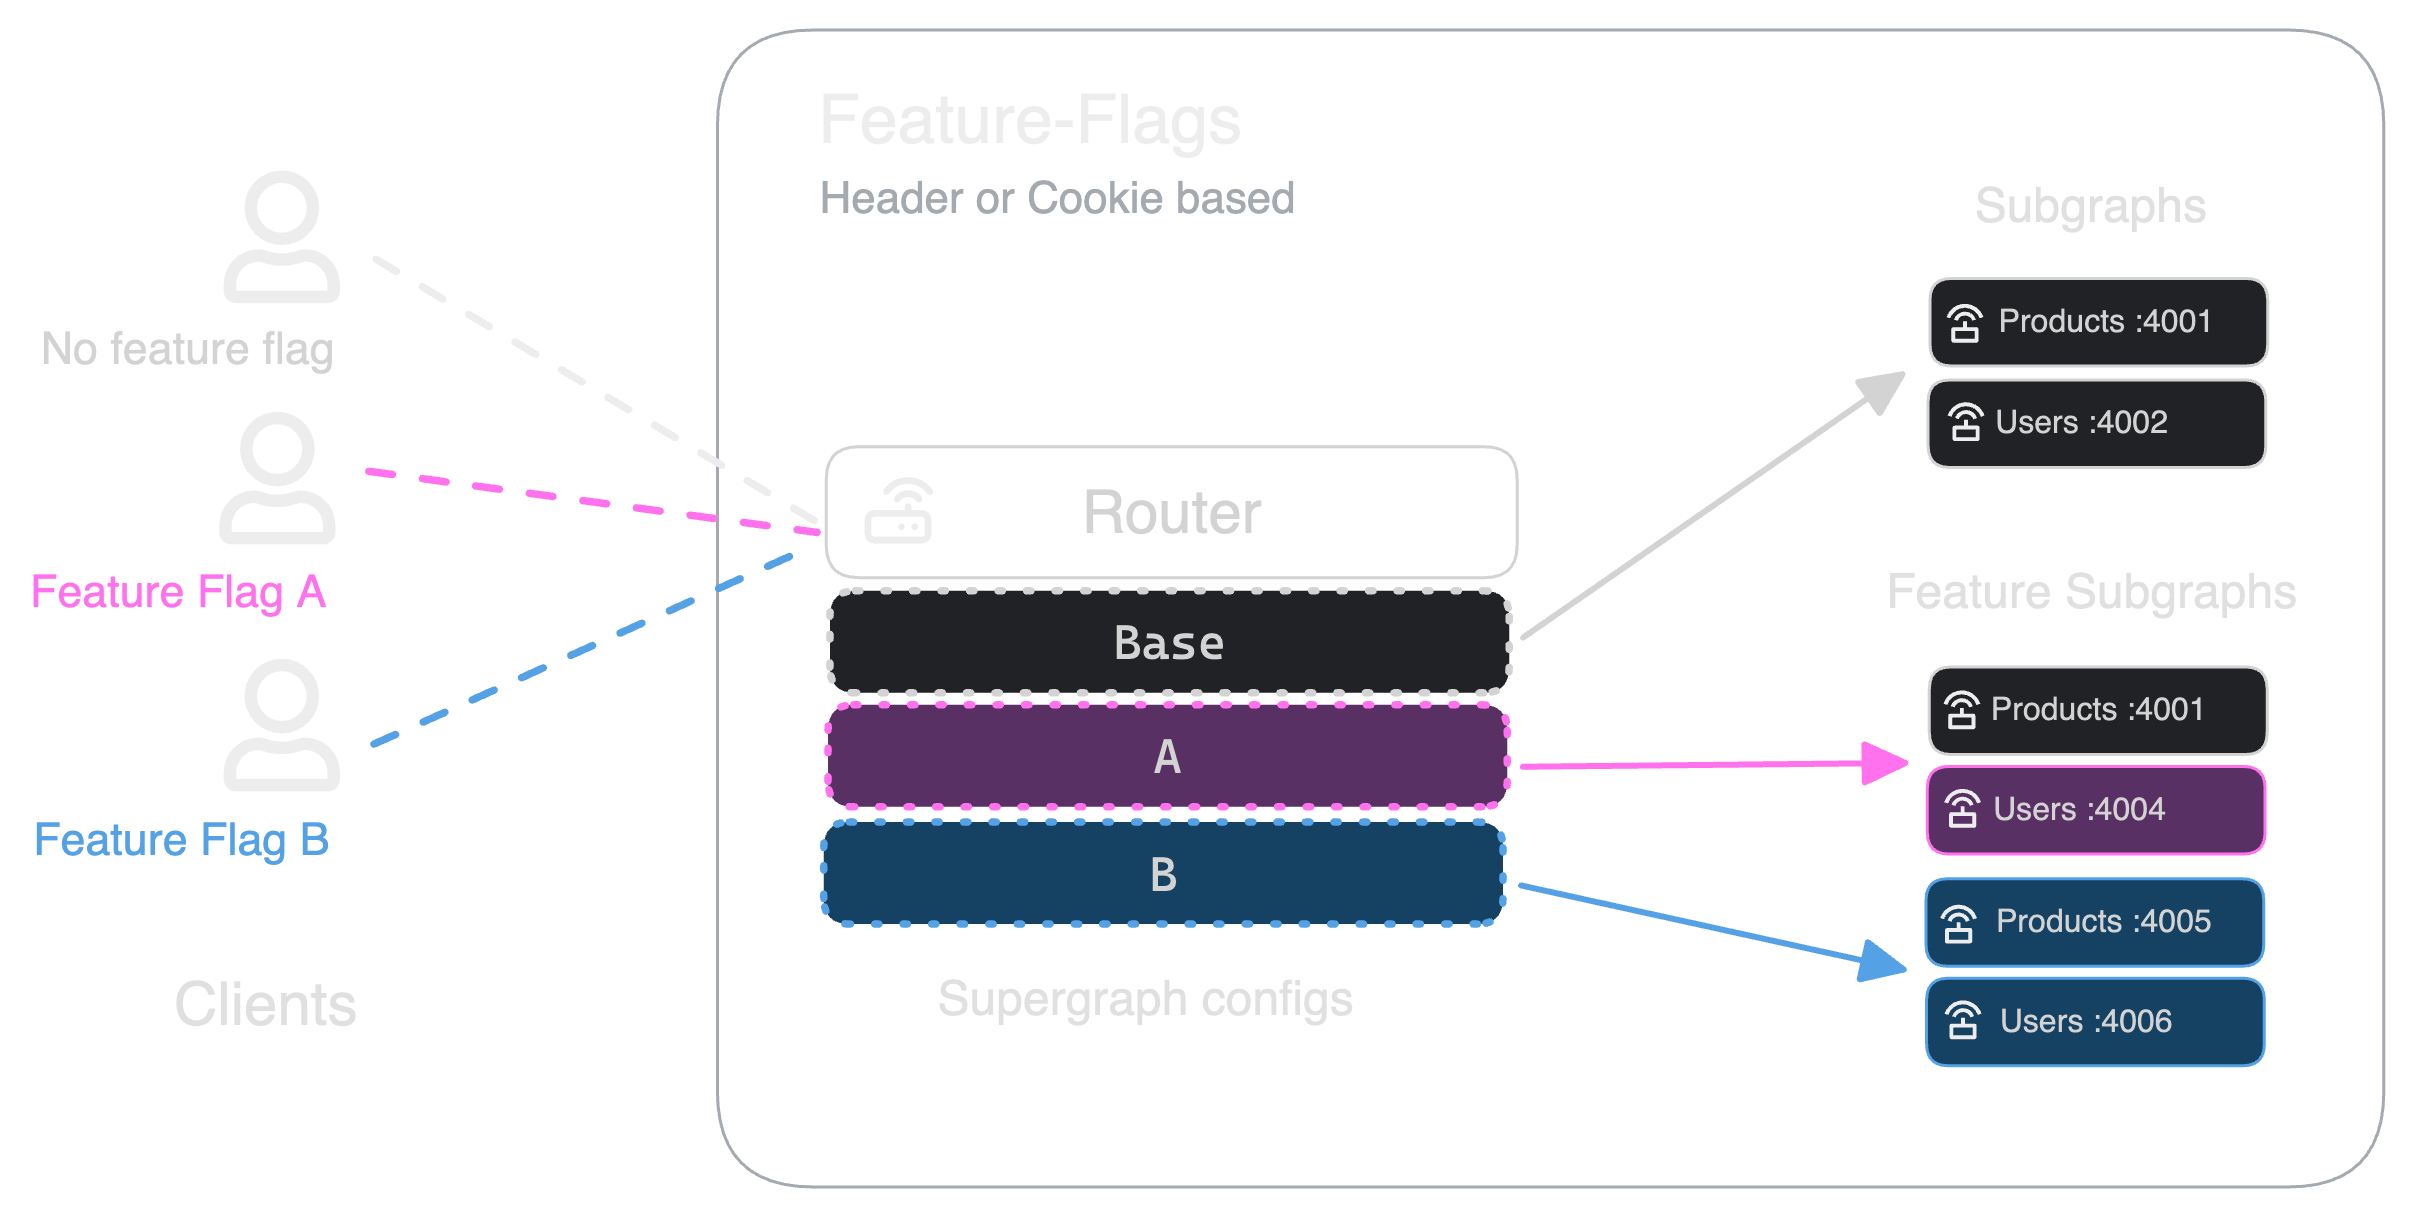 Feature Flags and Feature Subgraphs